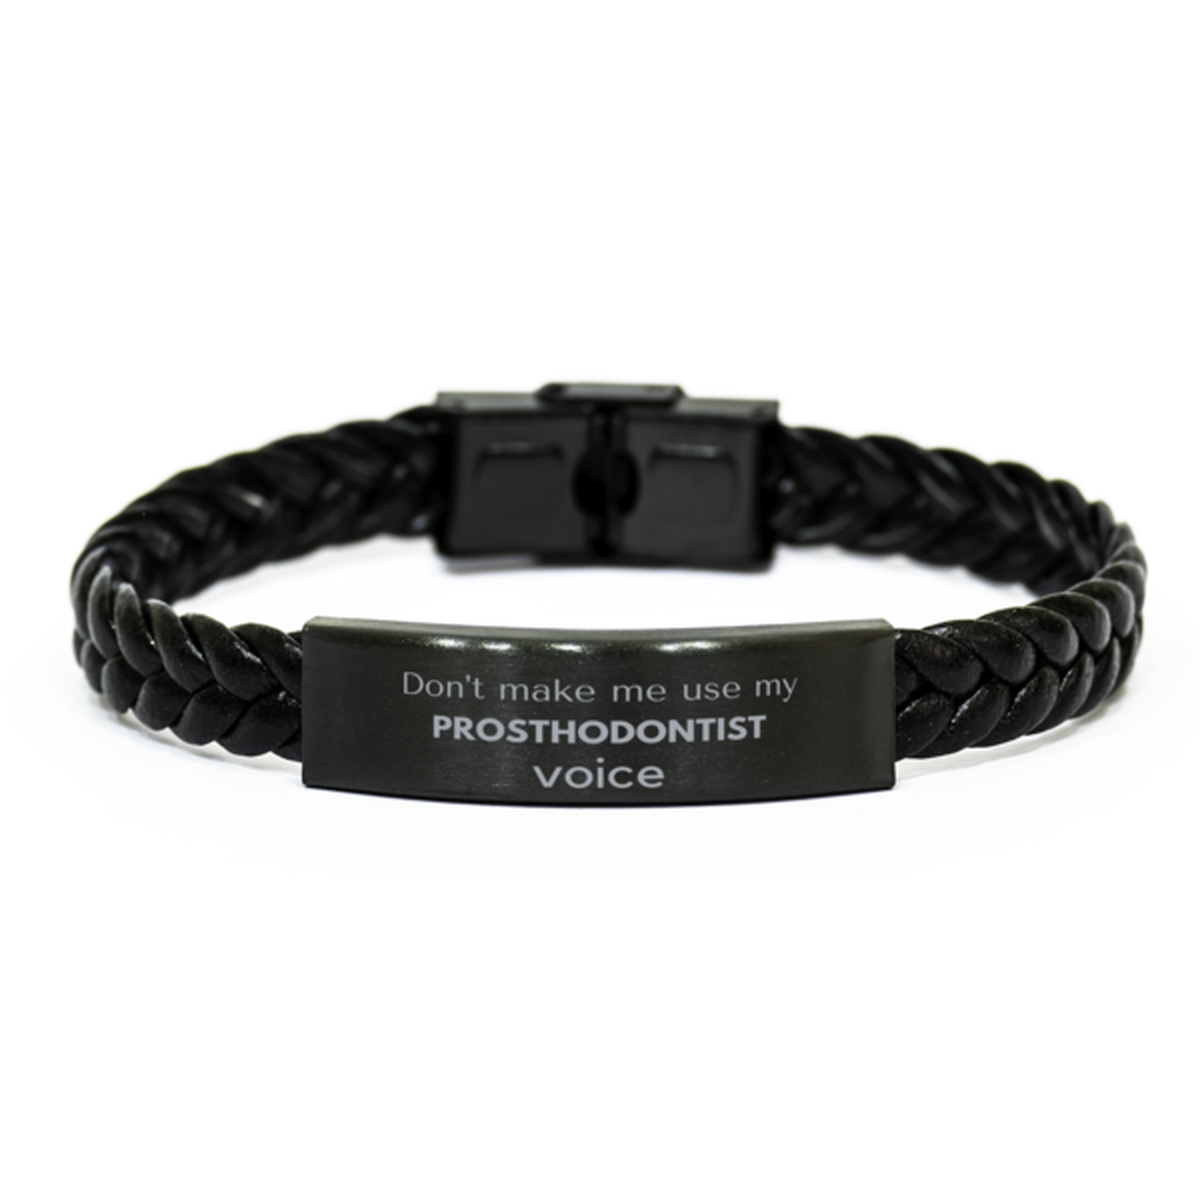 Don't make me use my Prosthodontist voice, Sarcasm Prosthodontist Gifts, Christmas Prosthodontist Braided Leather Bracelet Birthday Unique Gifts For Prosthodontist Coworkers, Men, Women, Colleague, Friends